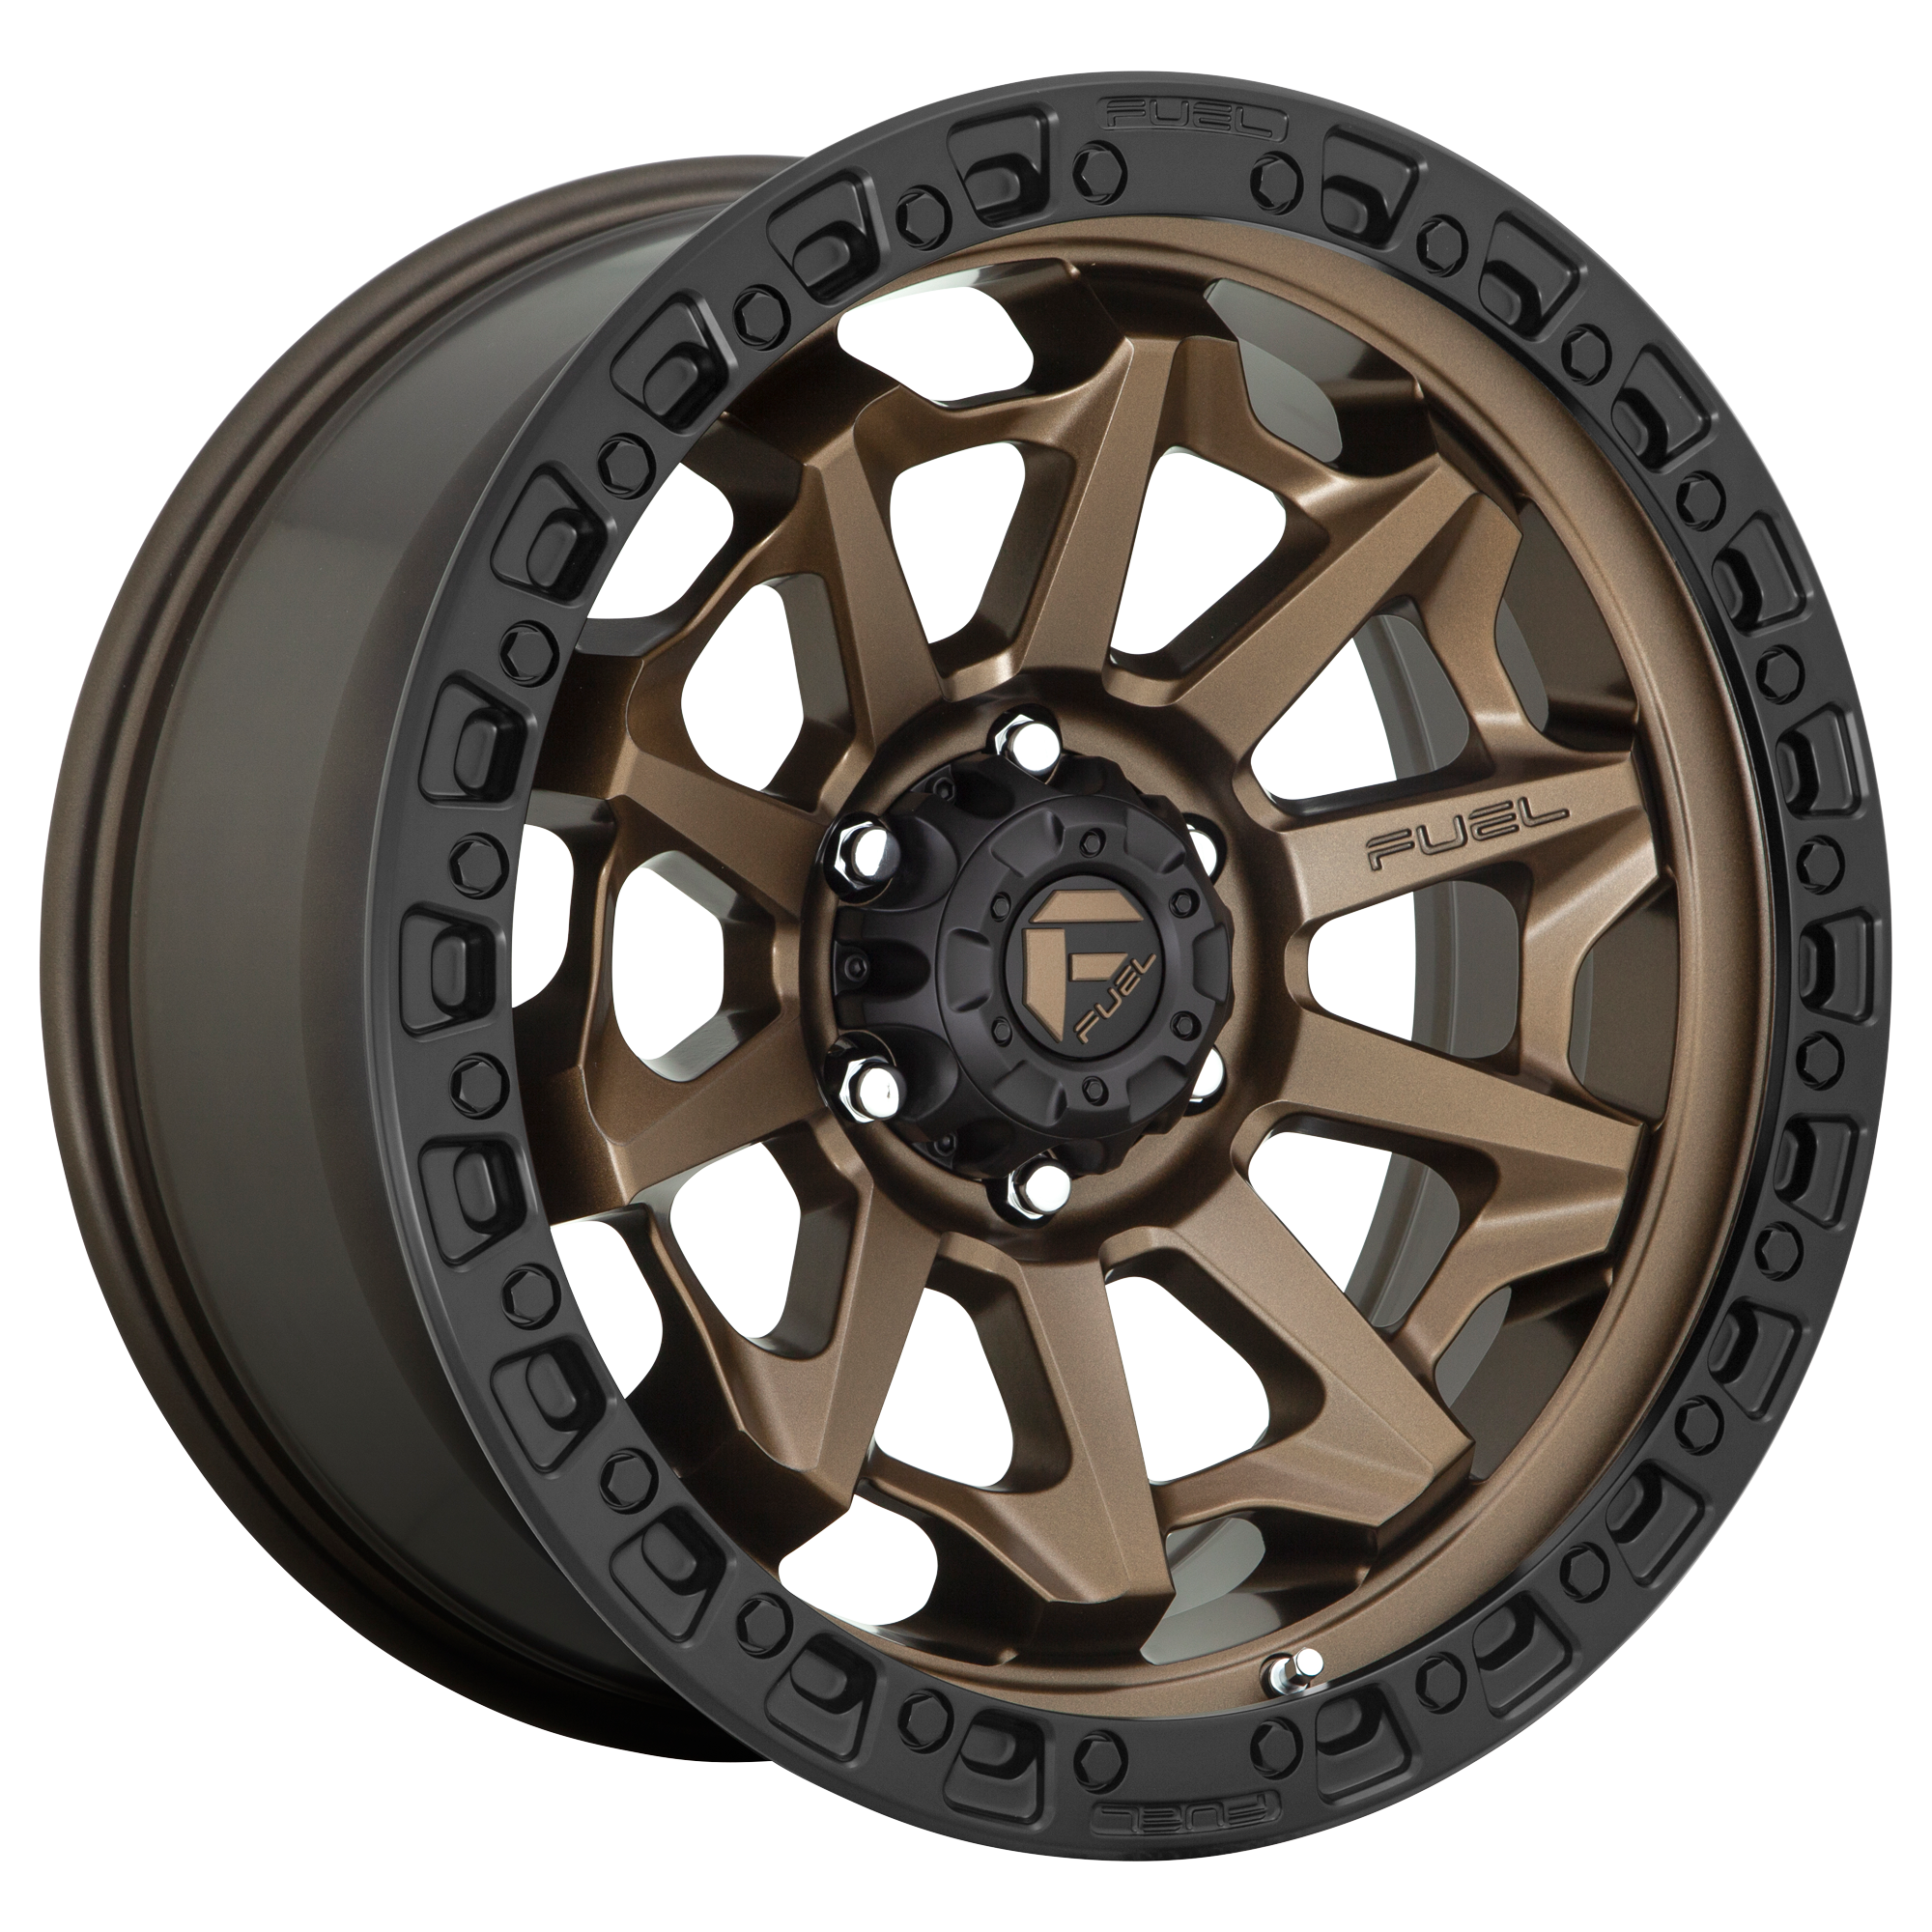 COVERT 20x9 5x127.00 MATTE BRONZE BLACK BEAD RING (1 mm) - Tires and Engine Performance